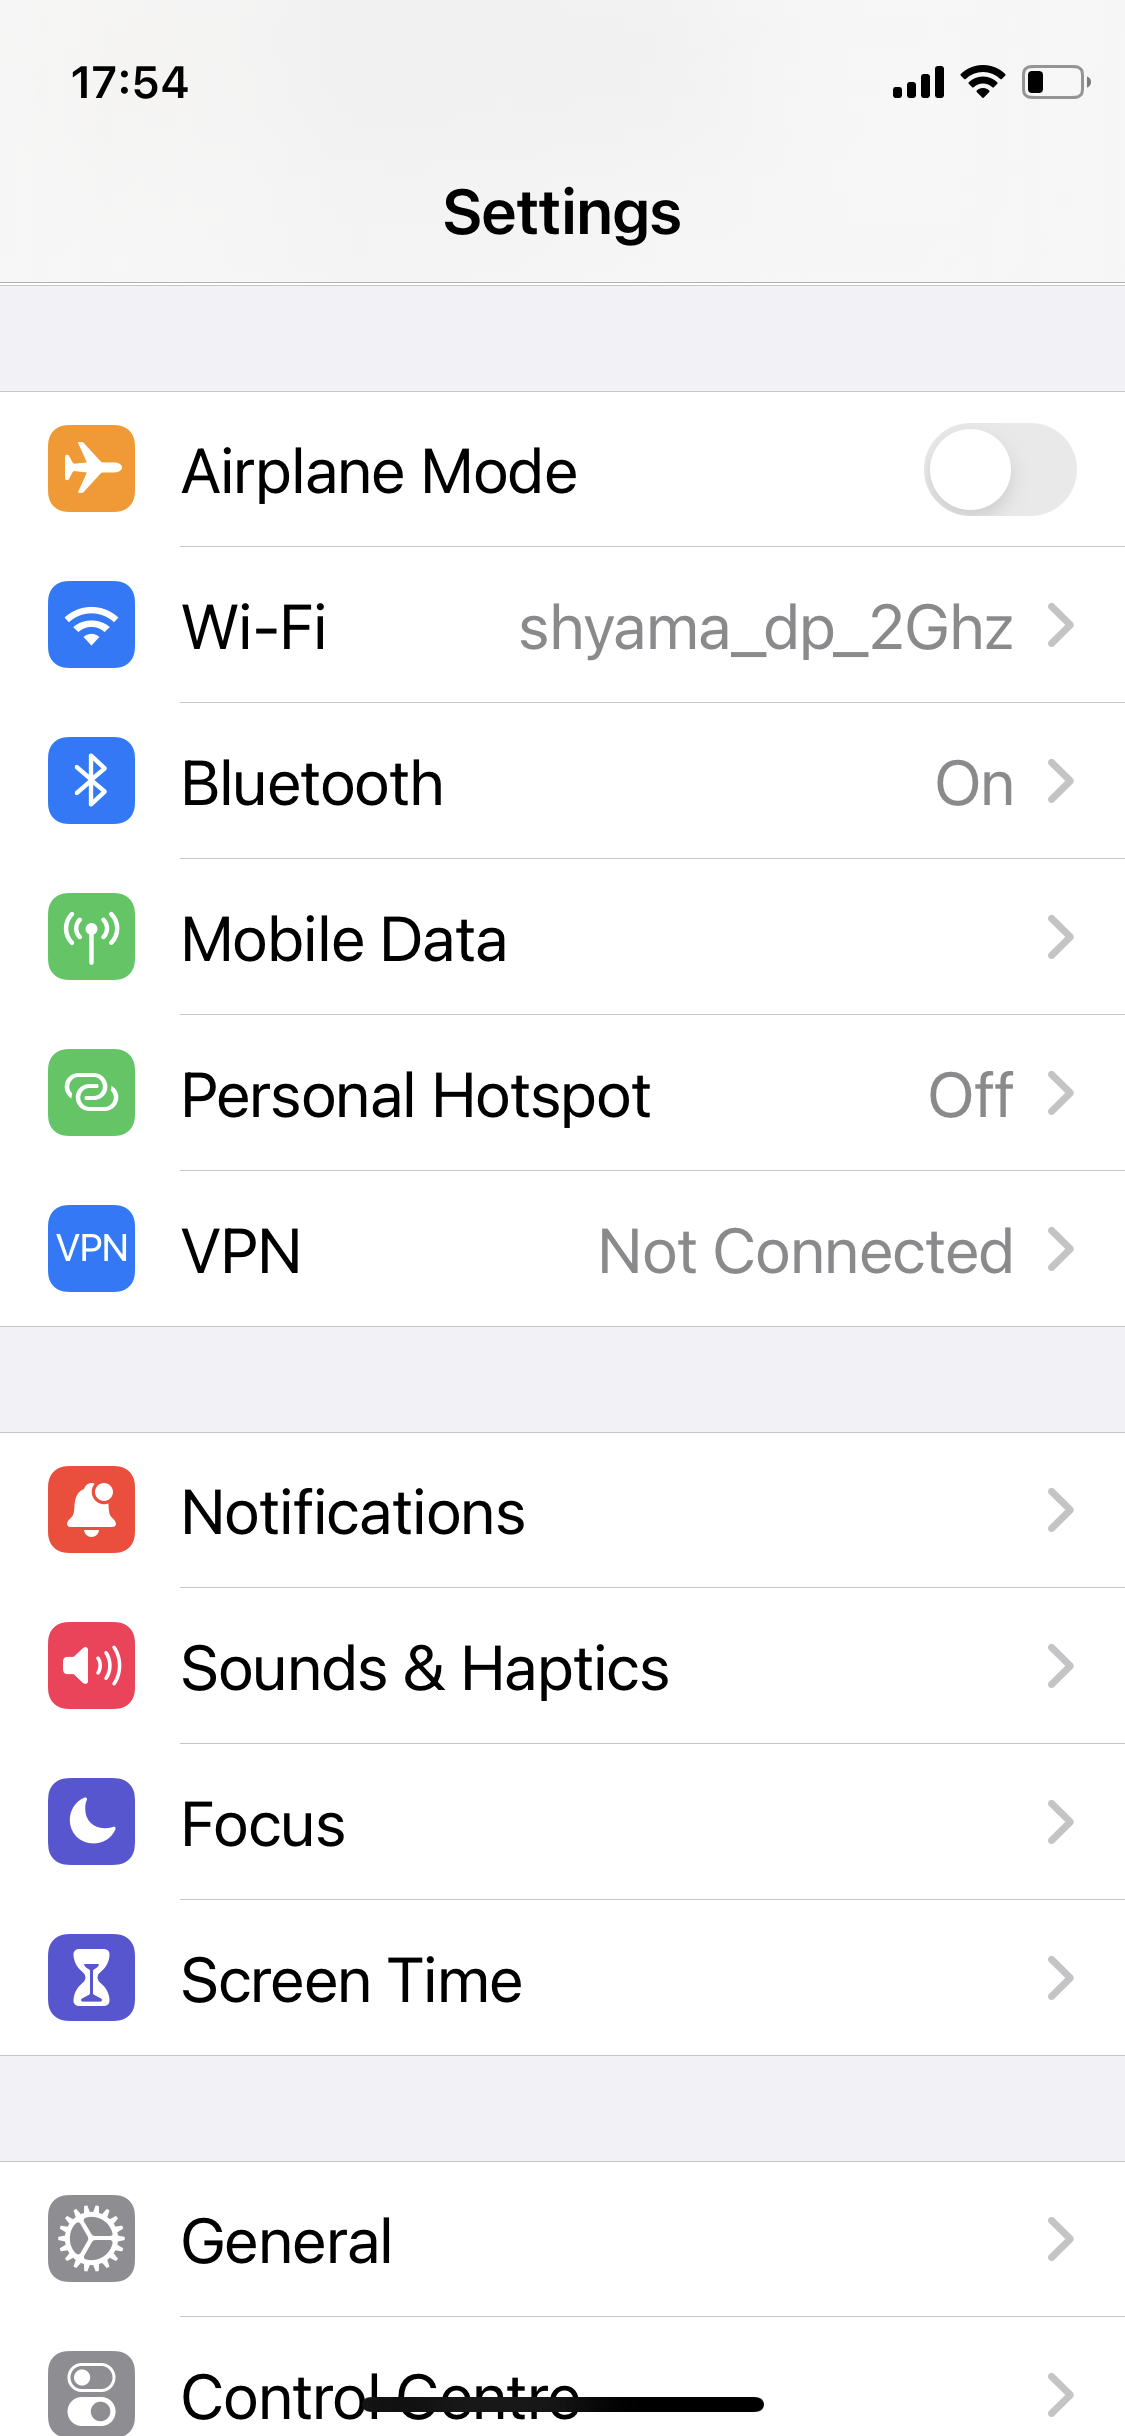 iOS pairing issue / SSID not prefilled: iOS system settings